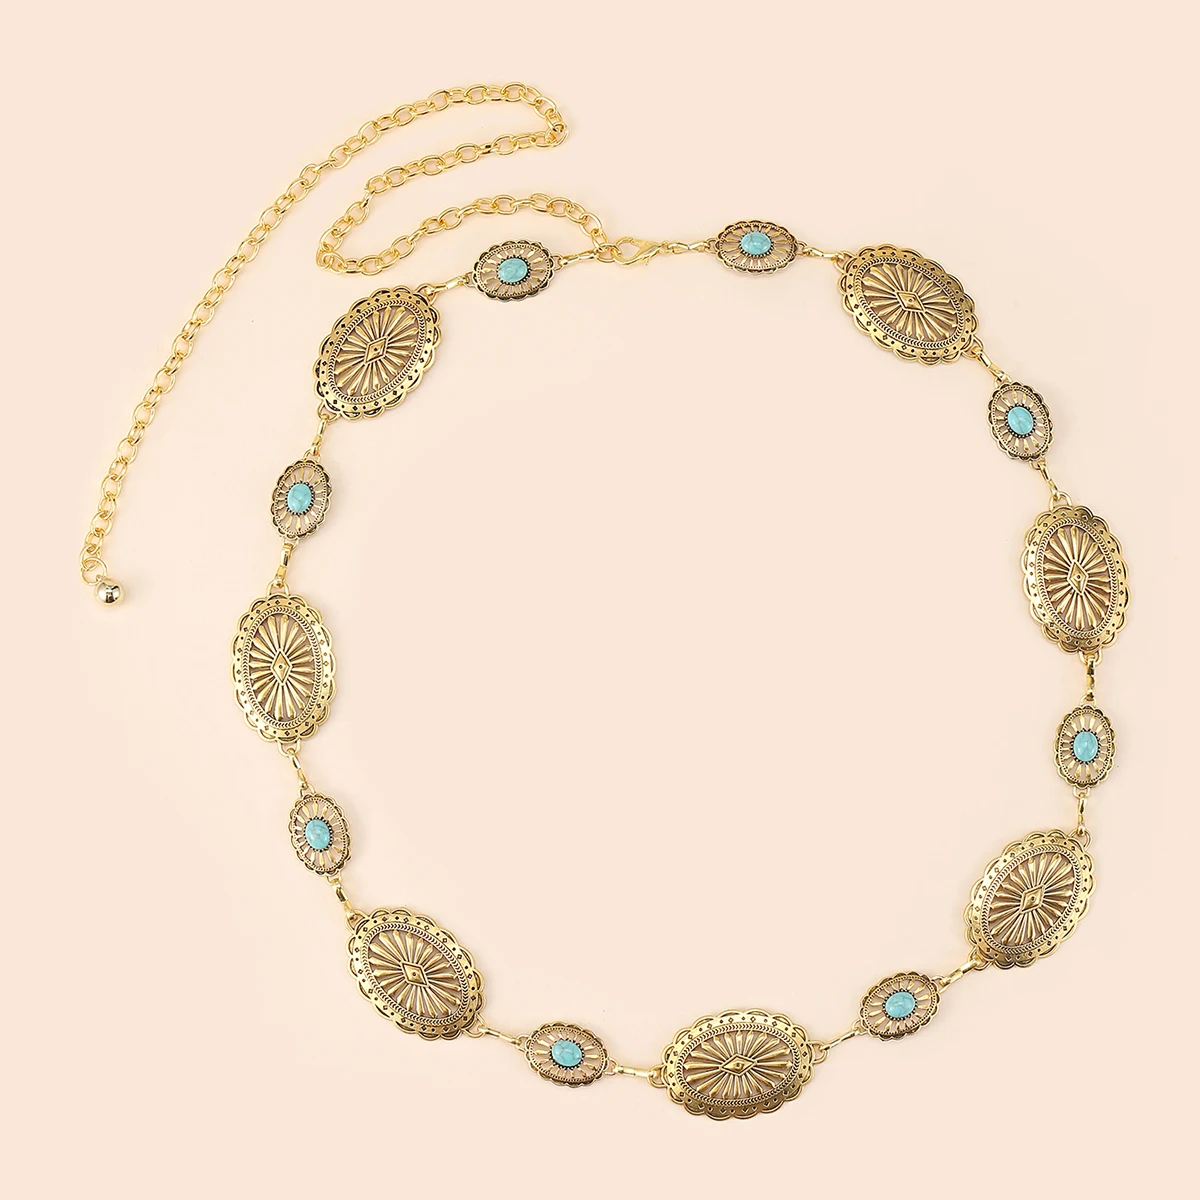 Fashion Geometric Shape Zinc Alloy Gold Color with Small Turquoises Decor Chain Belts for Women